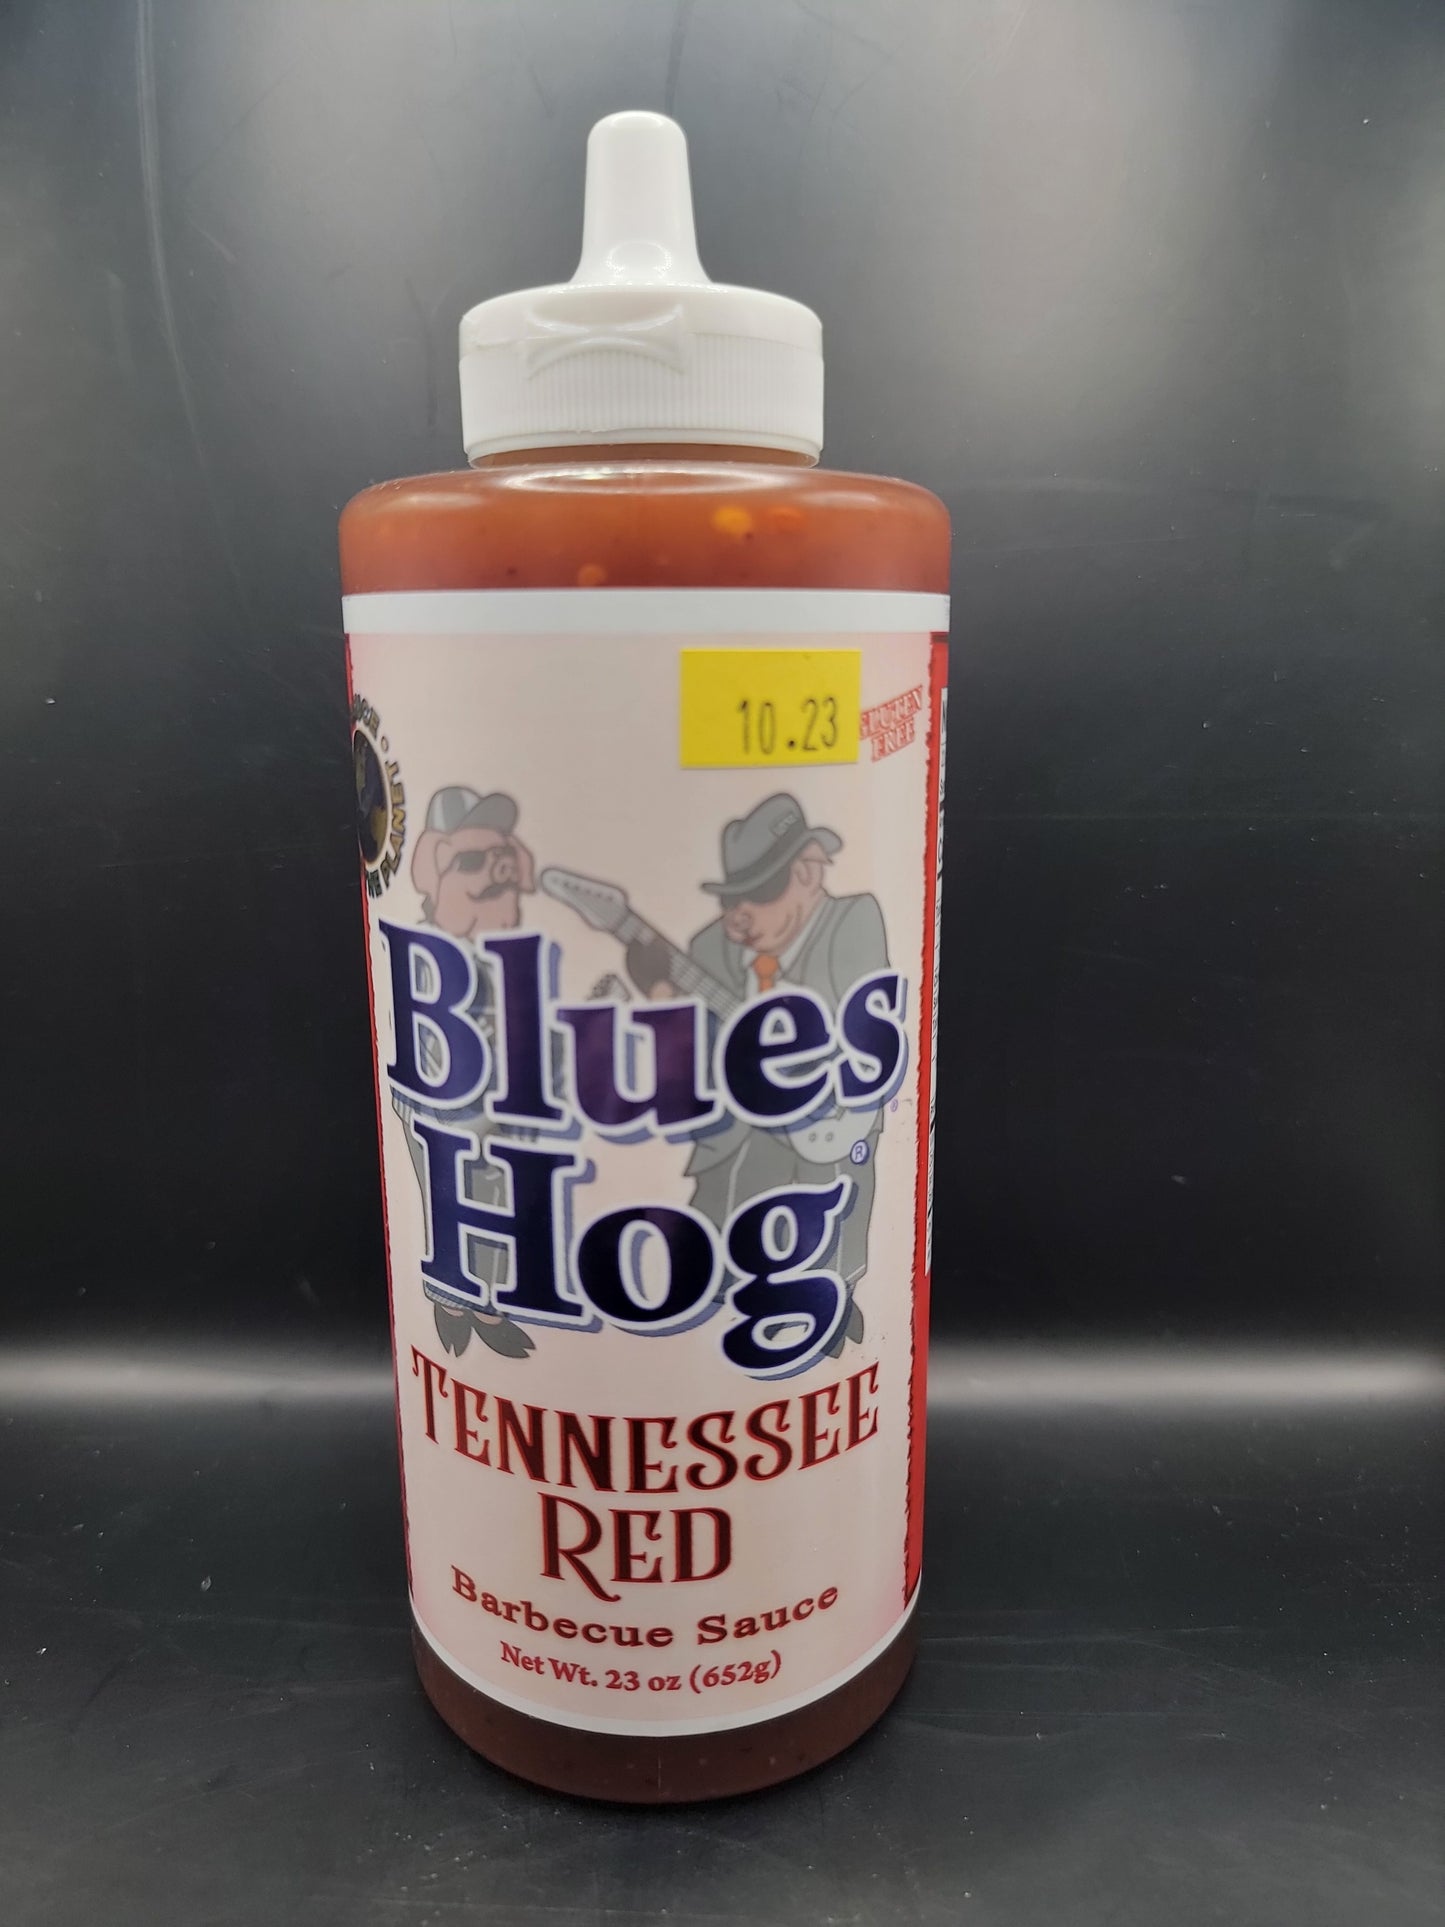 BLUES HOG TENNESSEE RED BBQ SAUCE